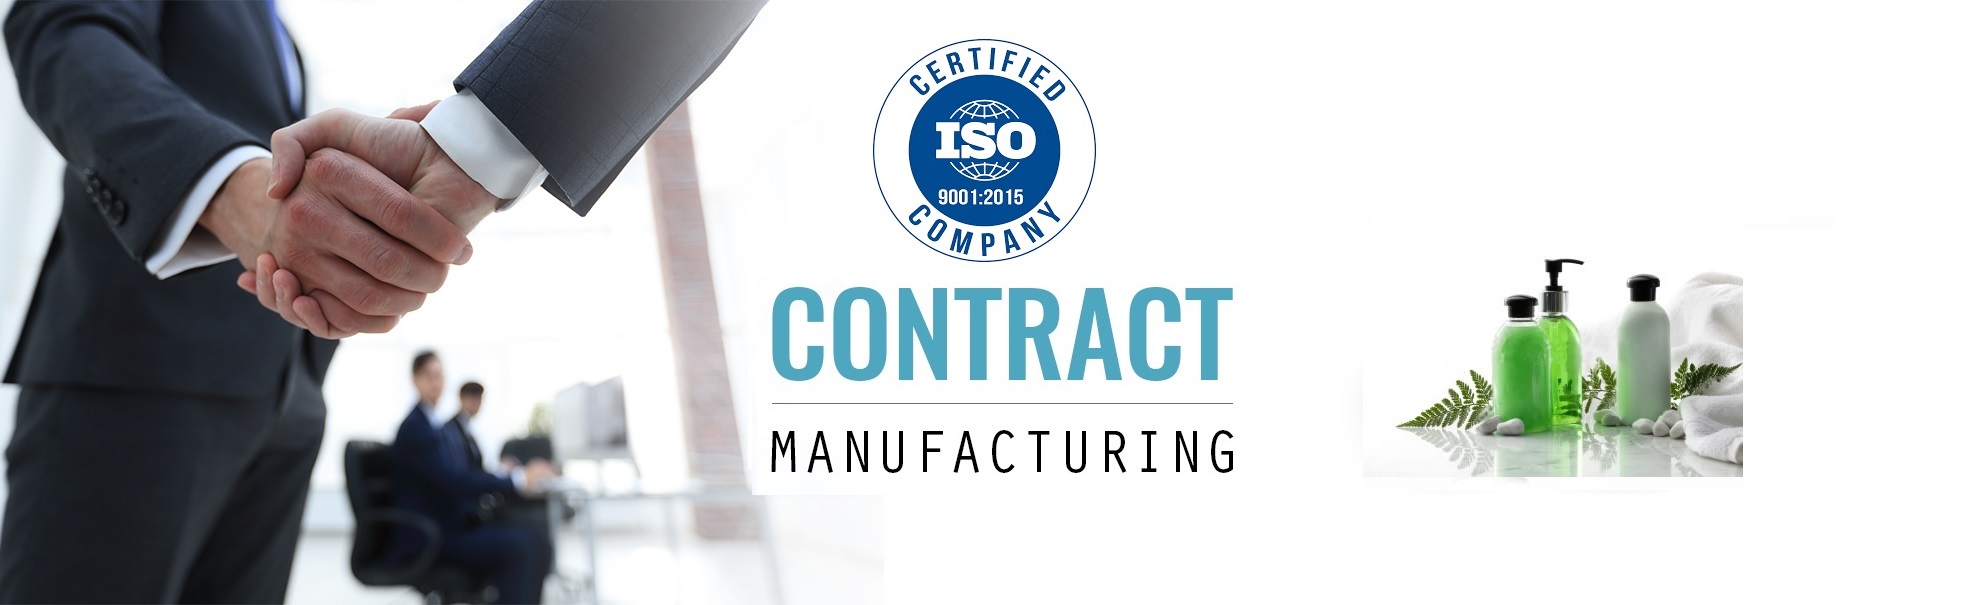 Contract Manufacturing - Cosmo Pro Pvt Ltd